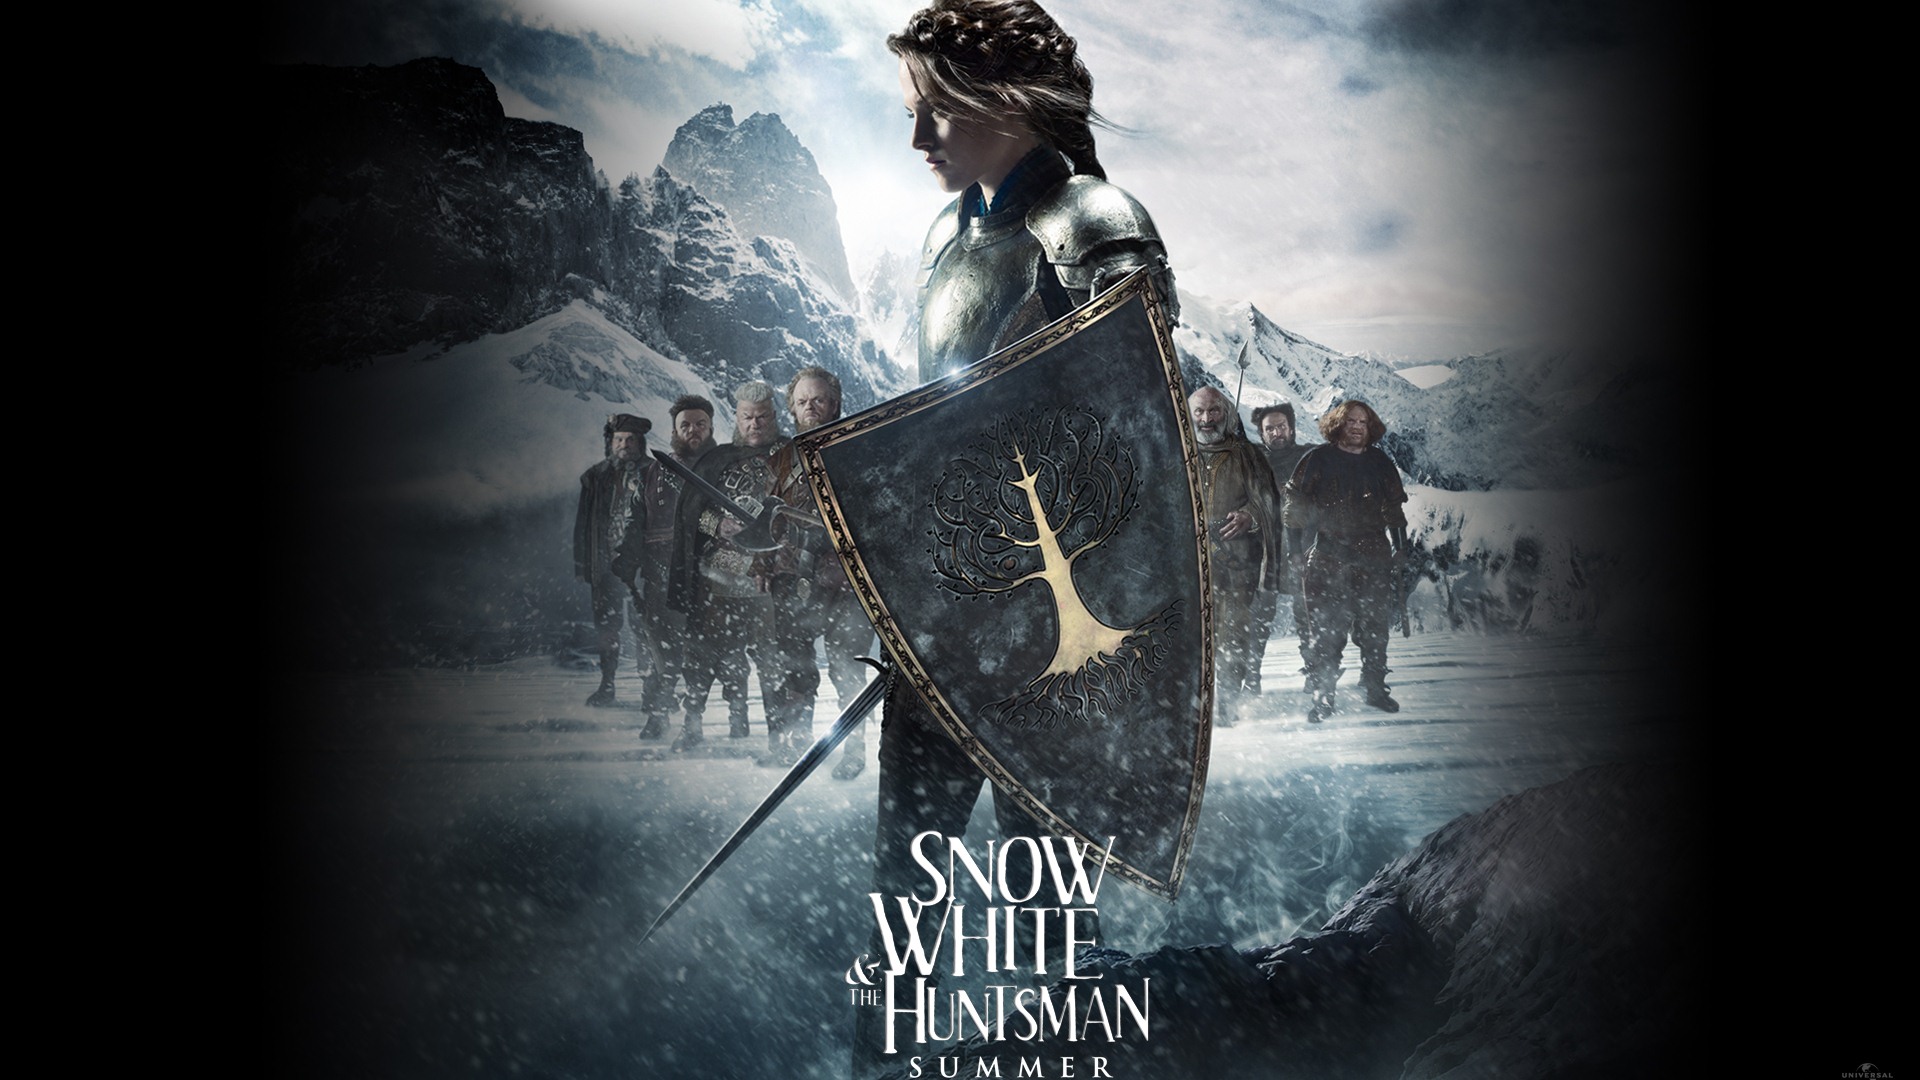 Snow White and the Huntsman HD wallpapers #10 - 1920x1080